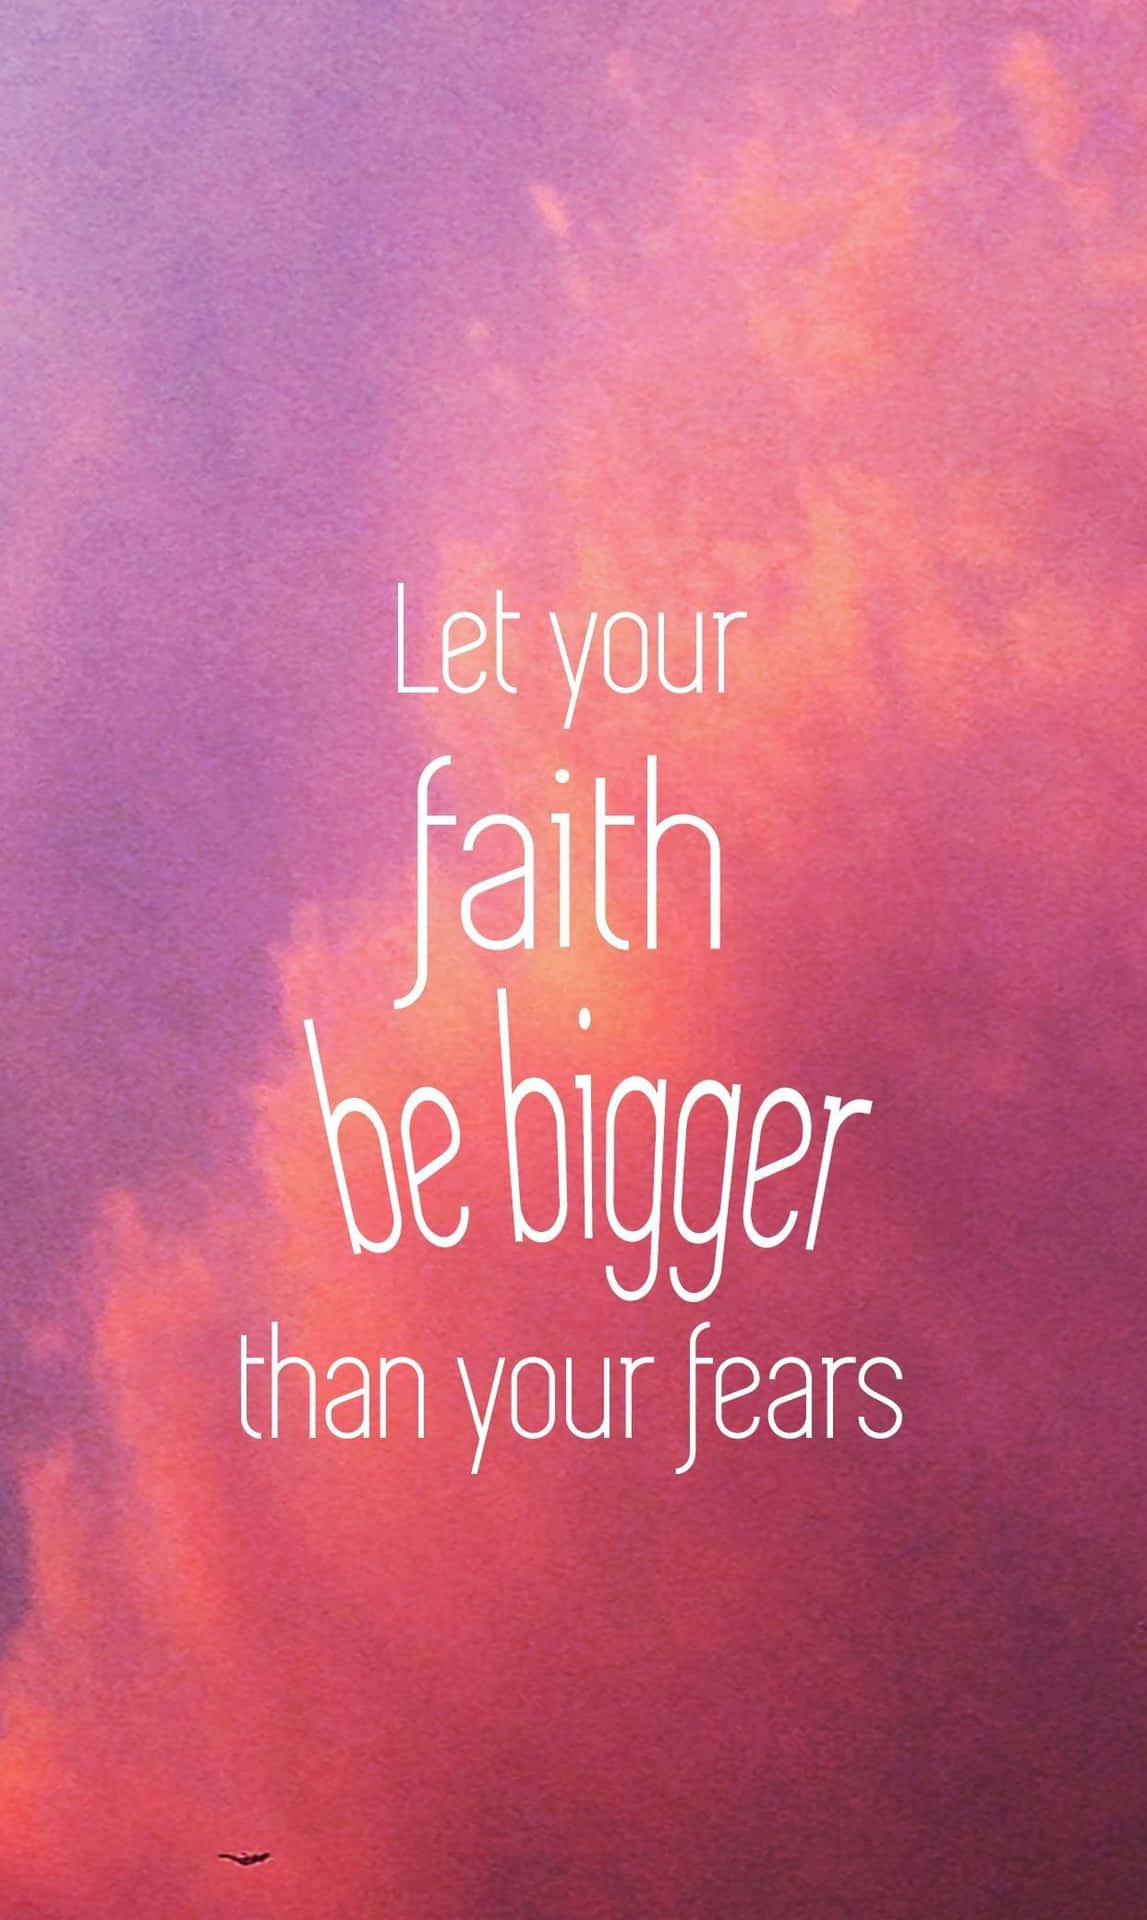 Let Your Faith Be Bigger Than Your Fears Wallpaper